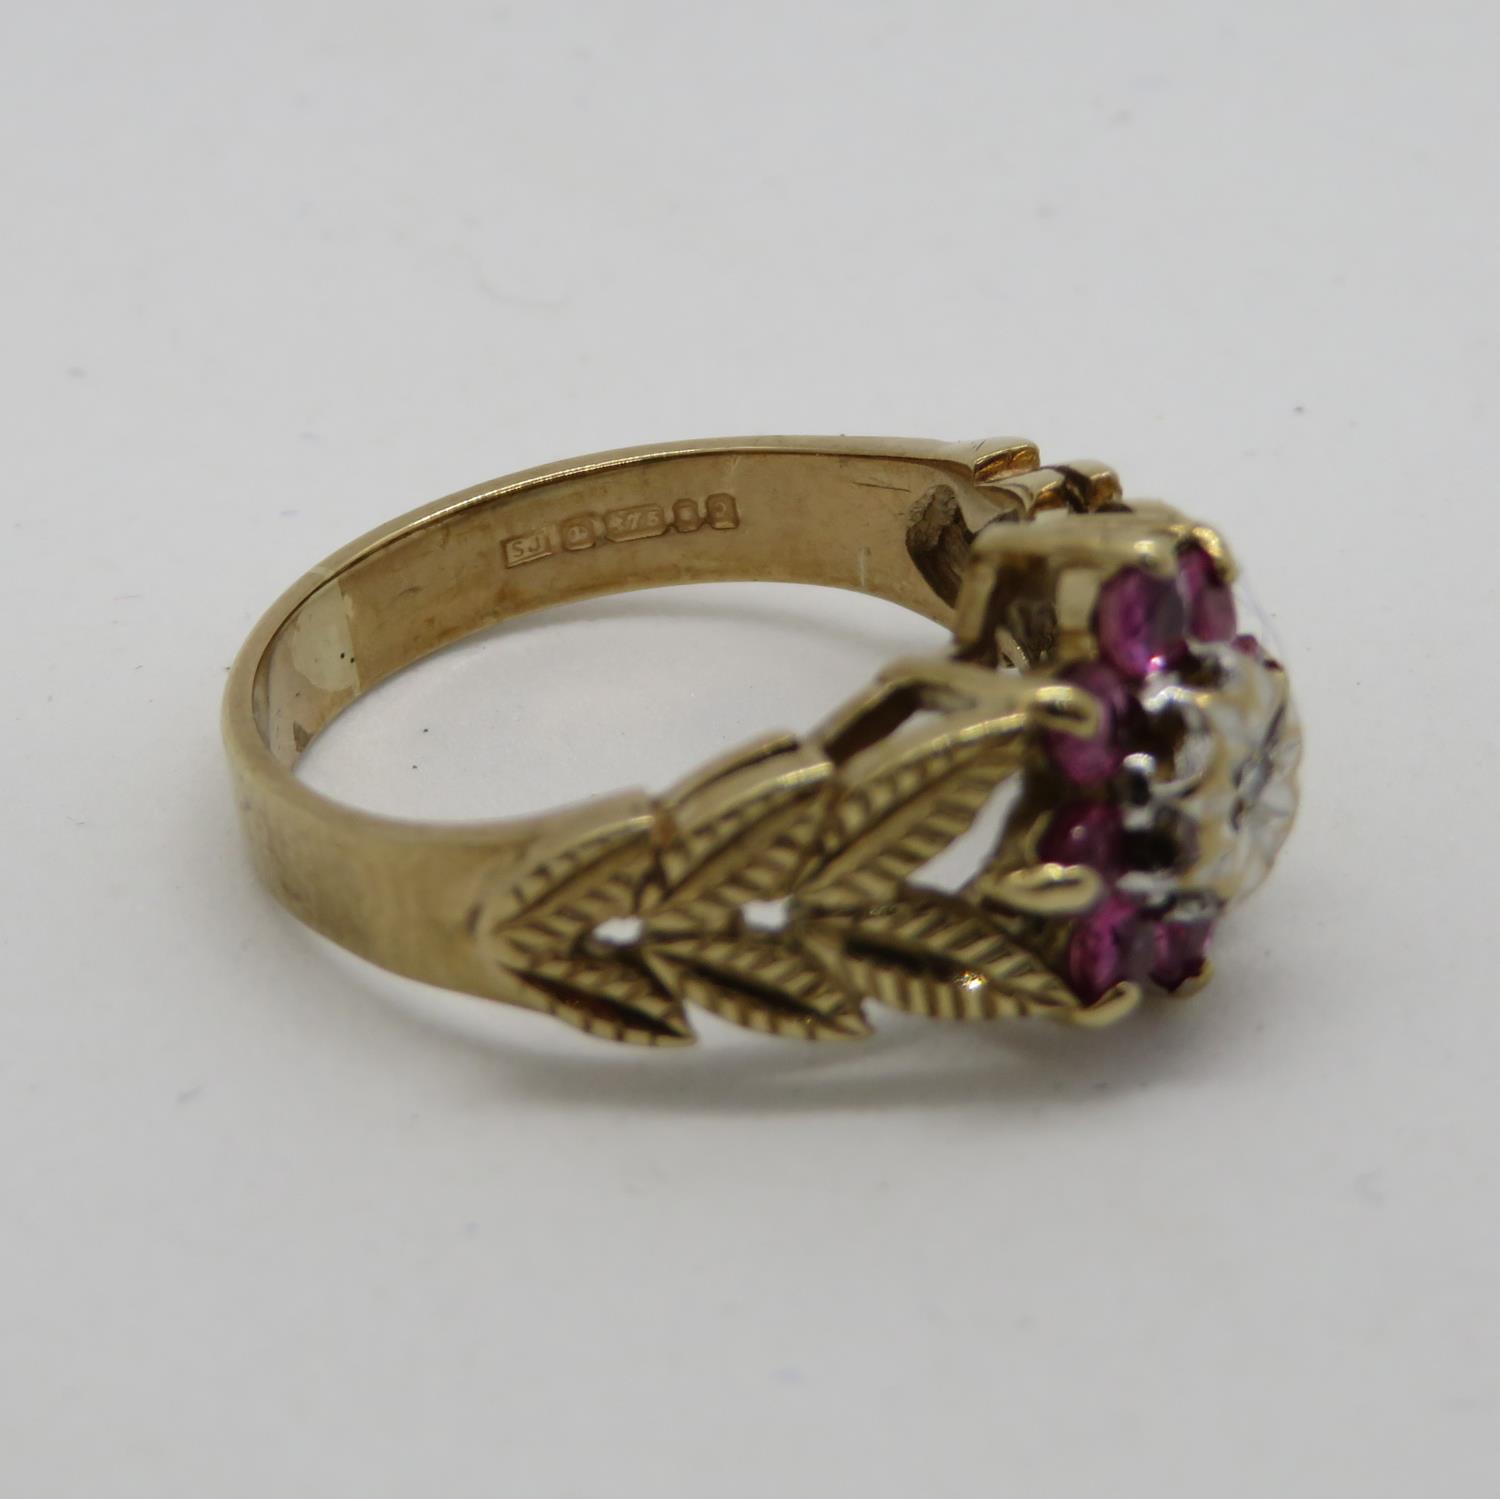 Retro ruby and diamond ring London HM 2.9g size J - Image 3 of 3